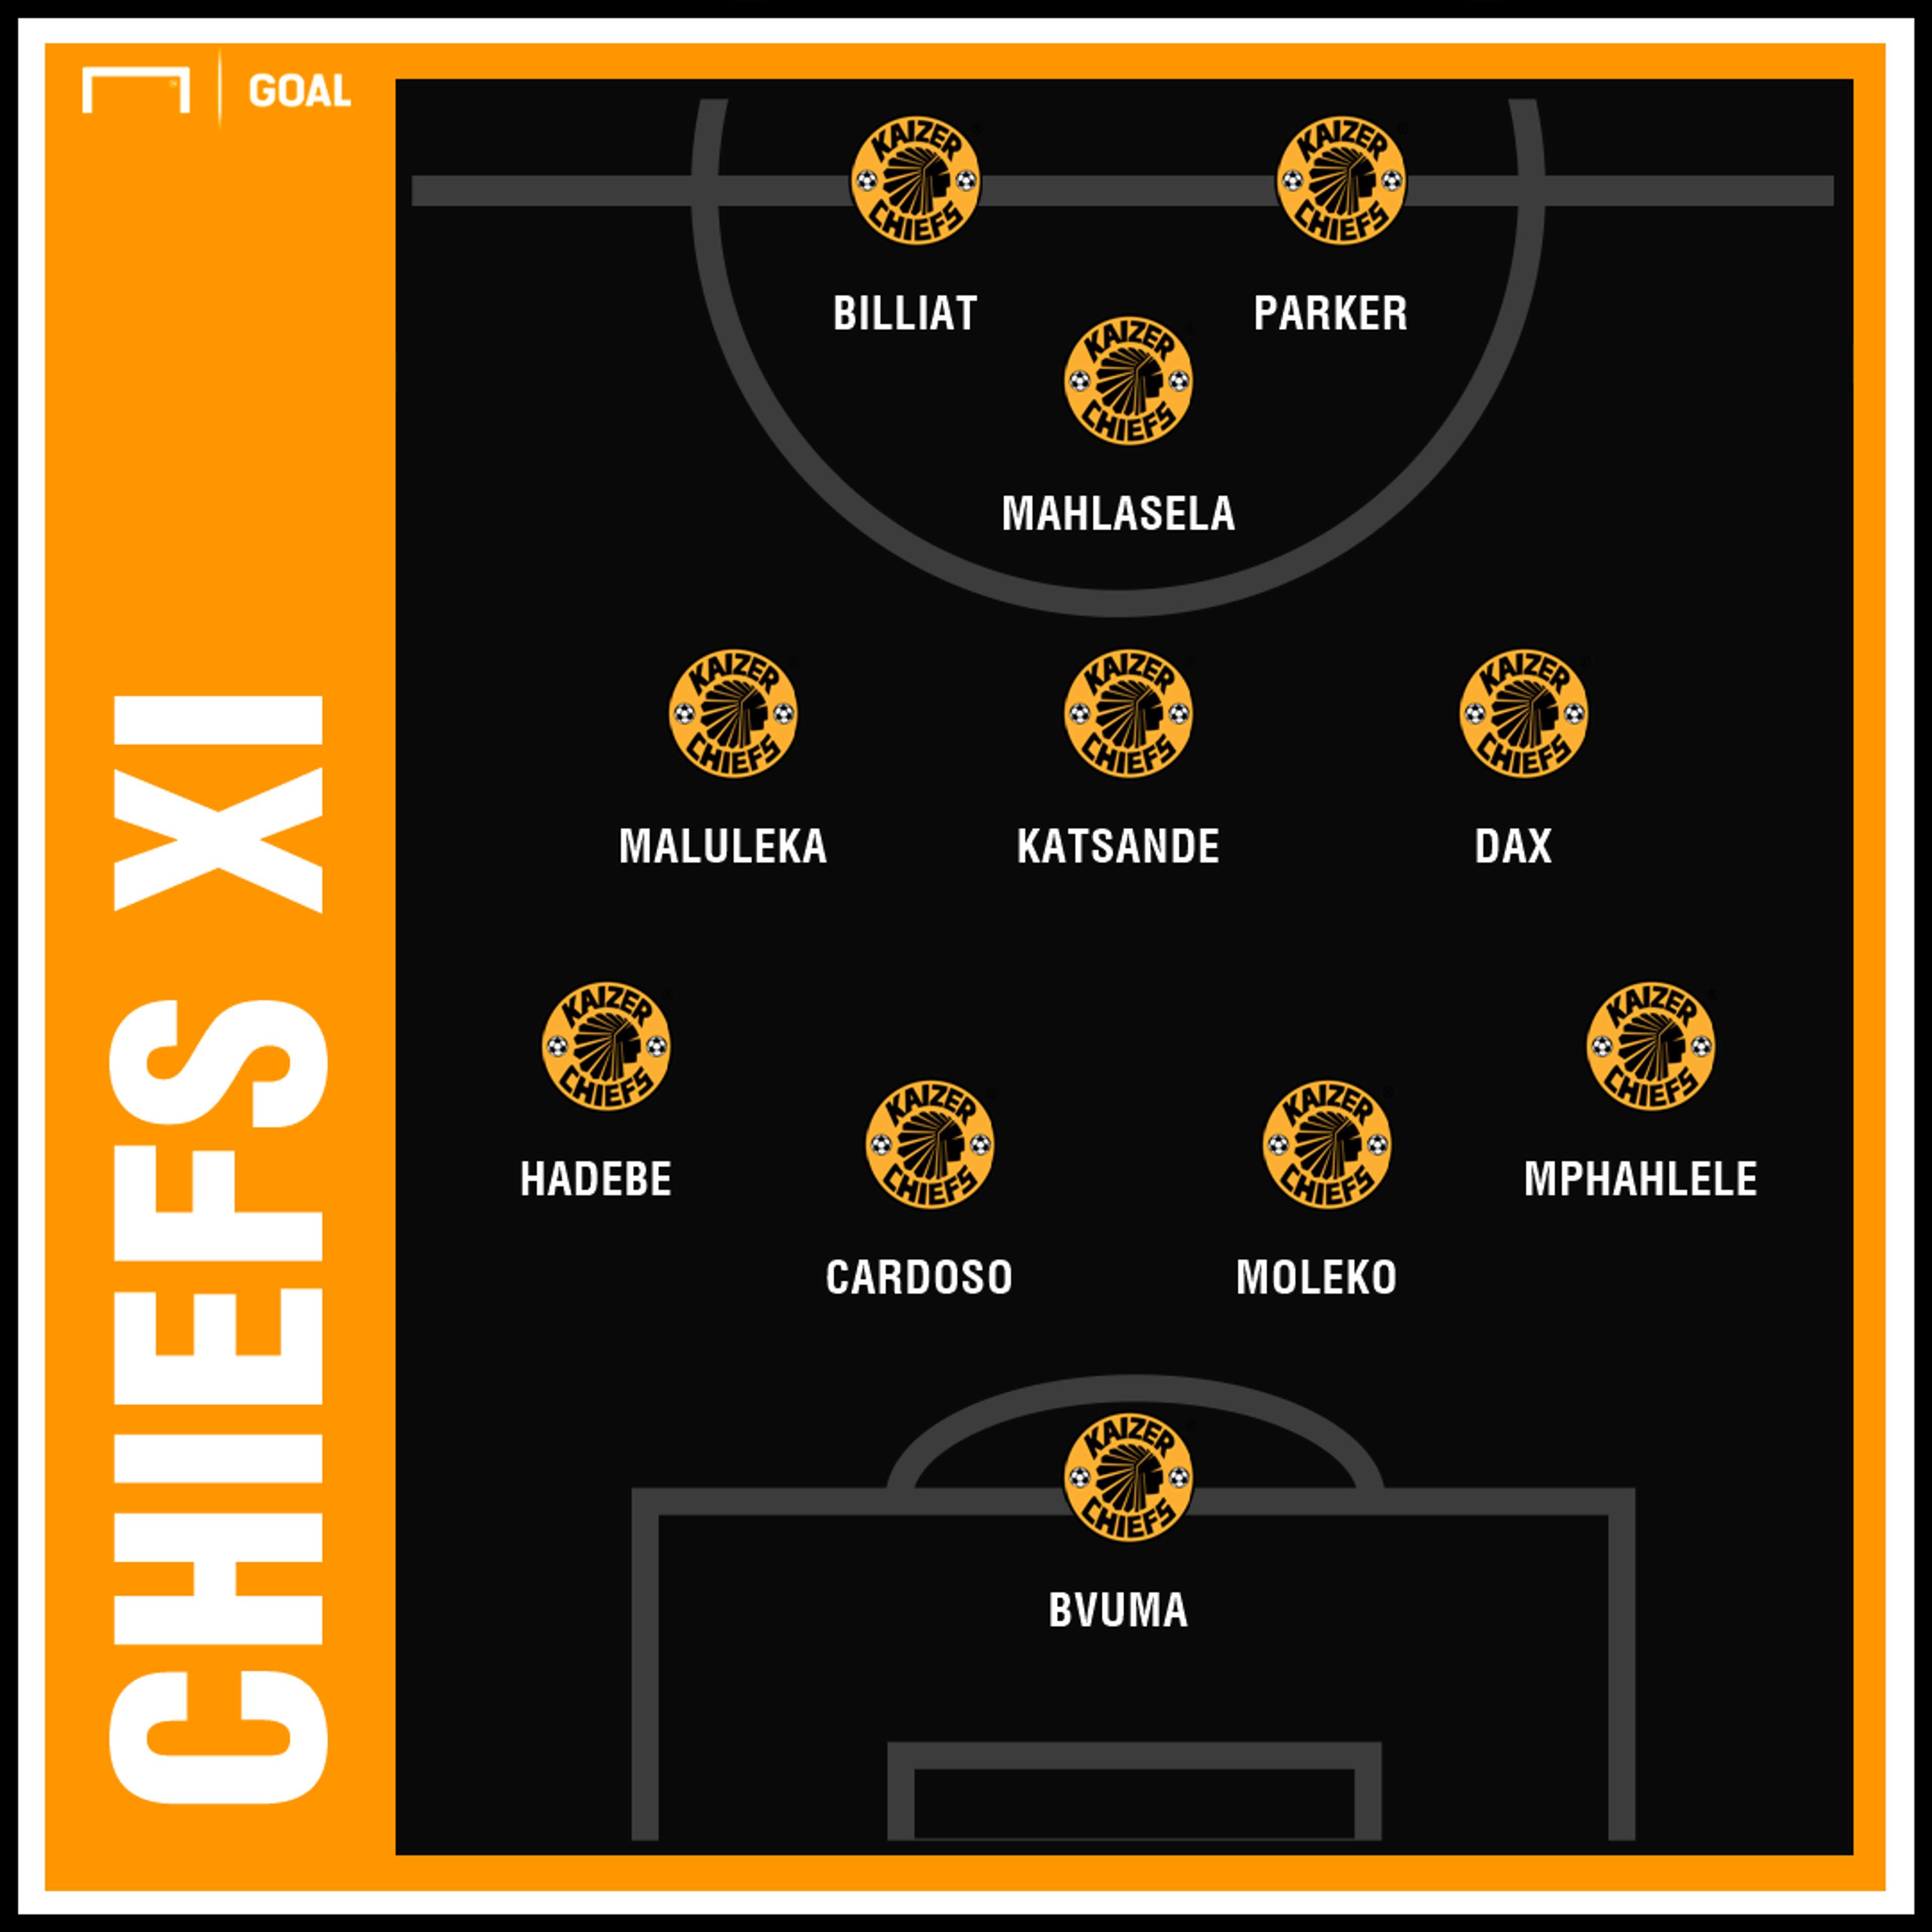 Tactical analysis - Chippa United v Kaizer Chiefs